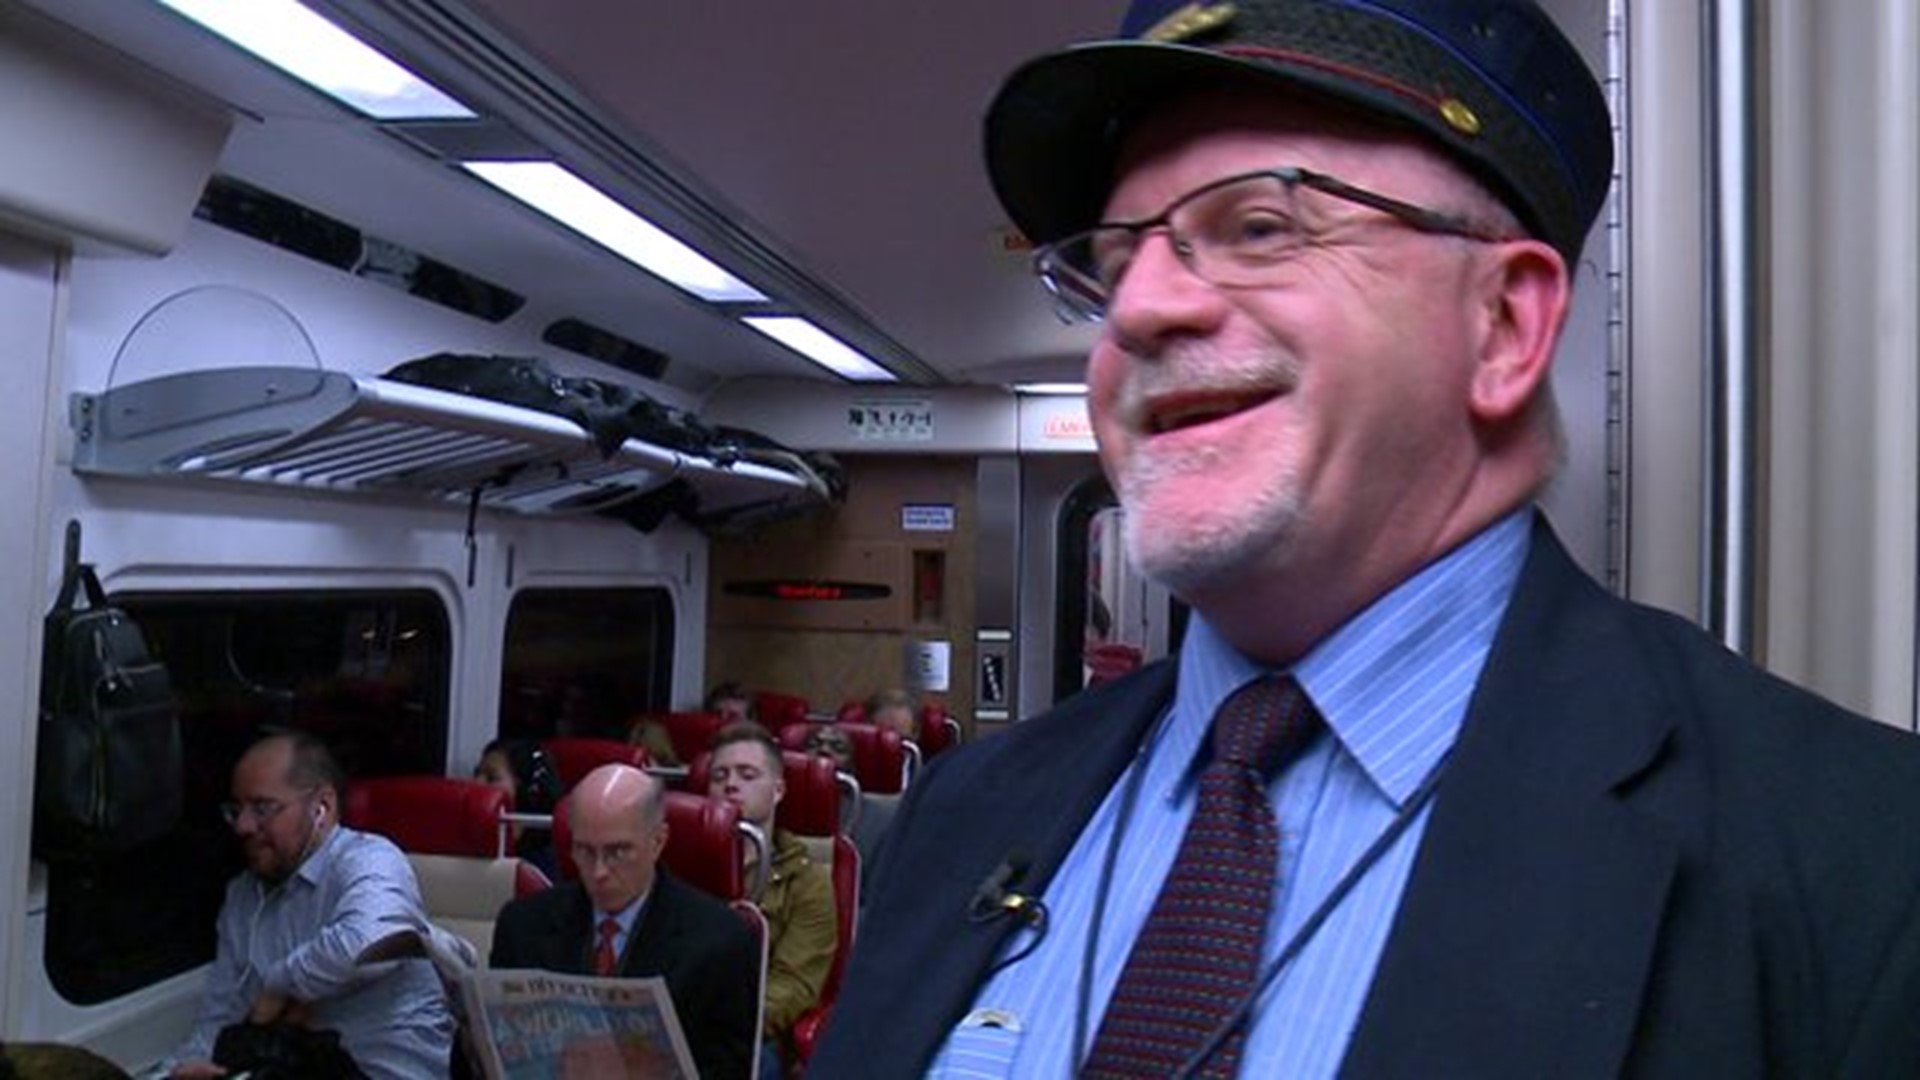 Train conductor lights up the cars with his performance chops